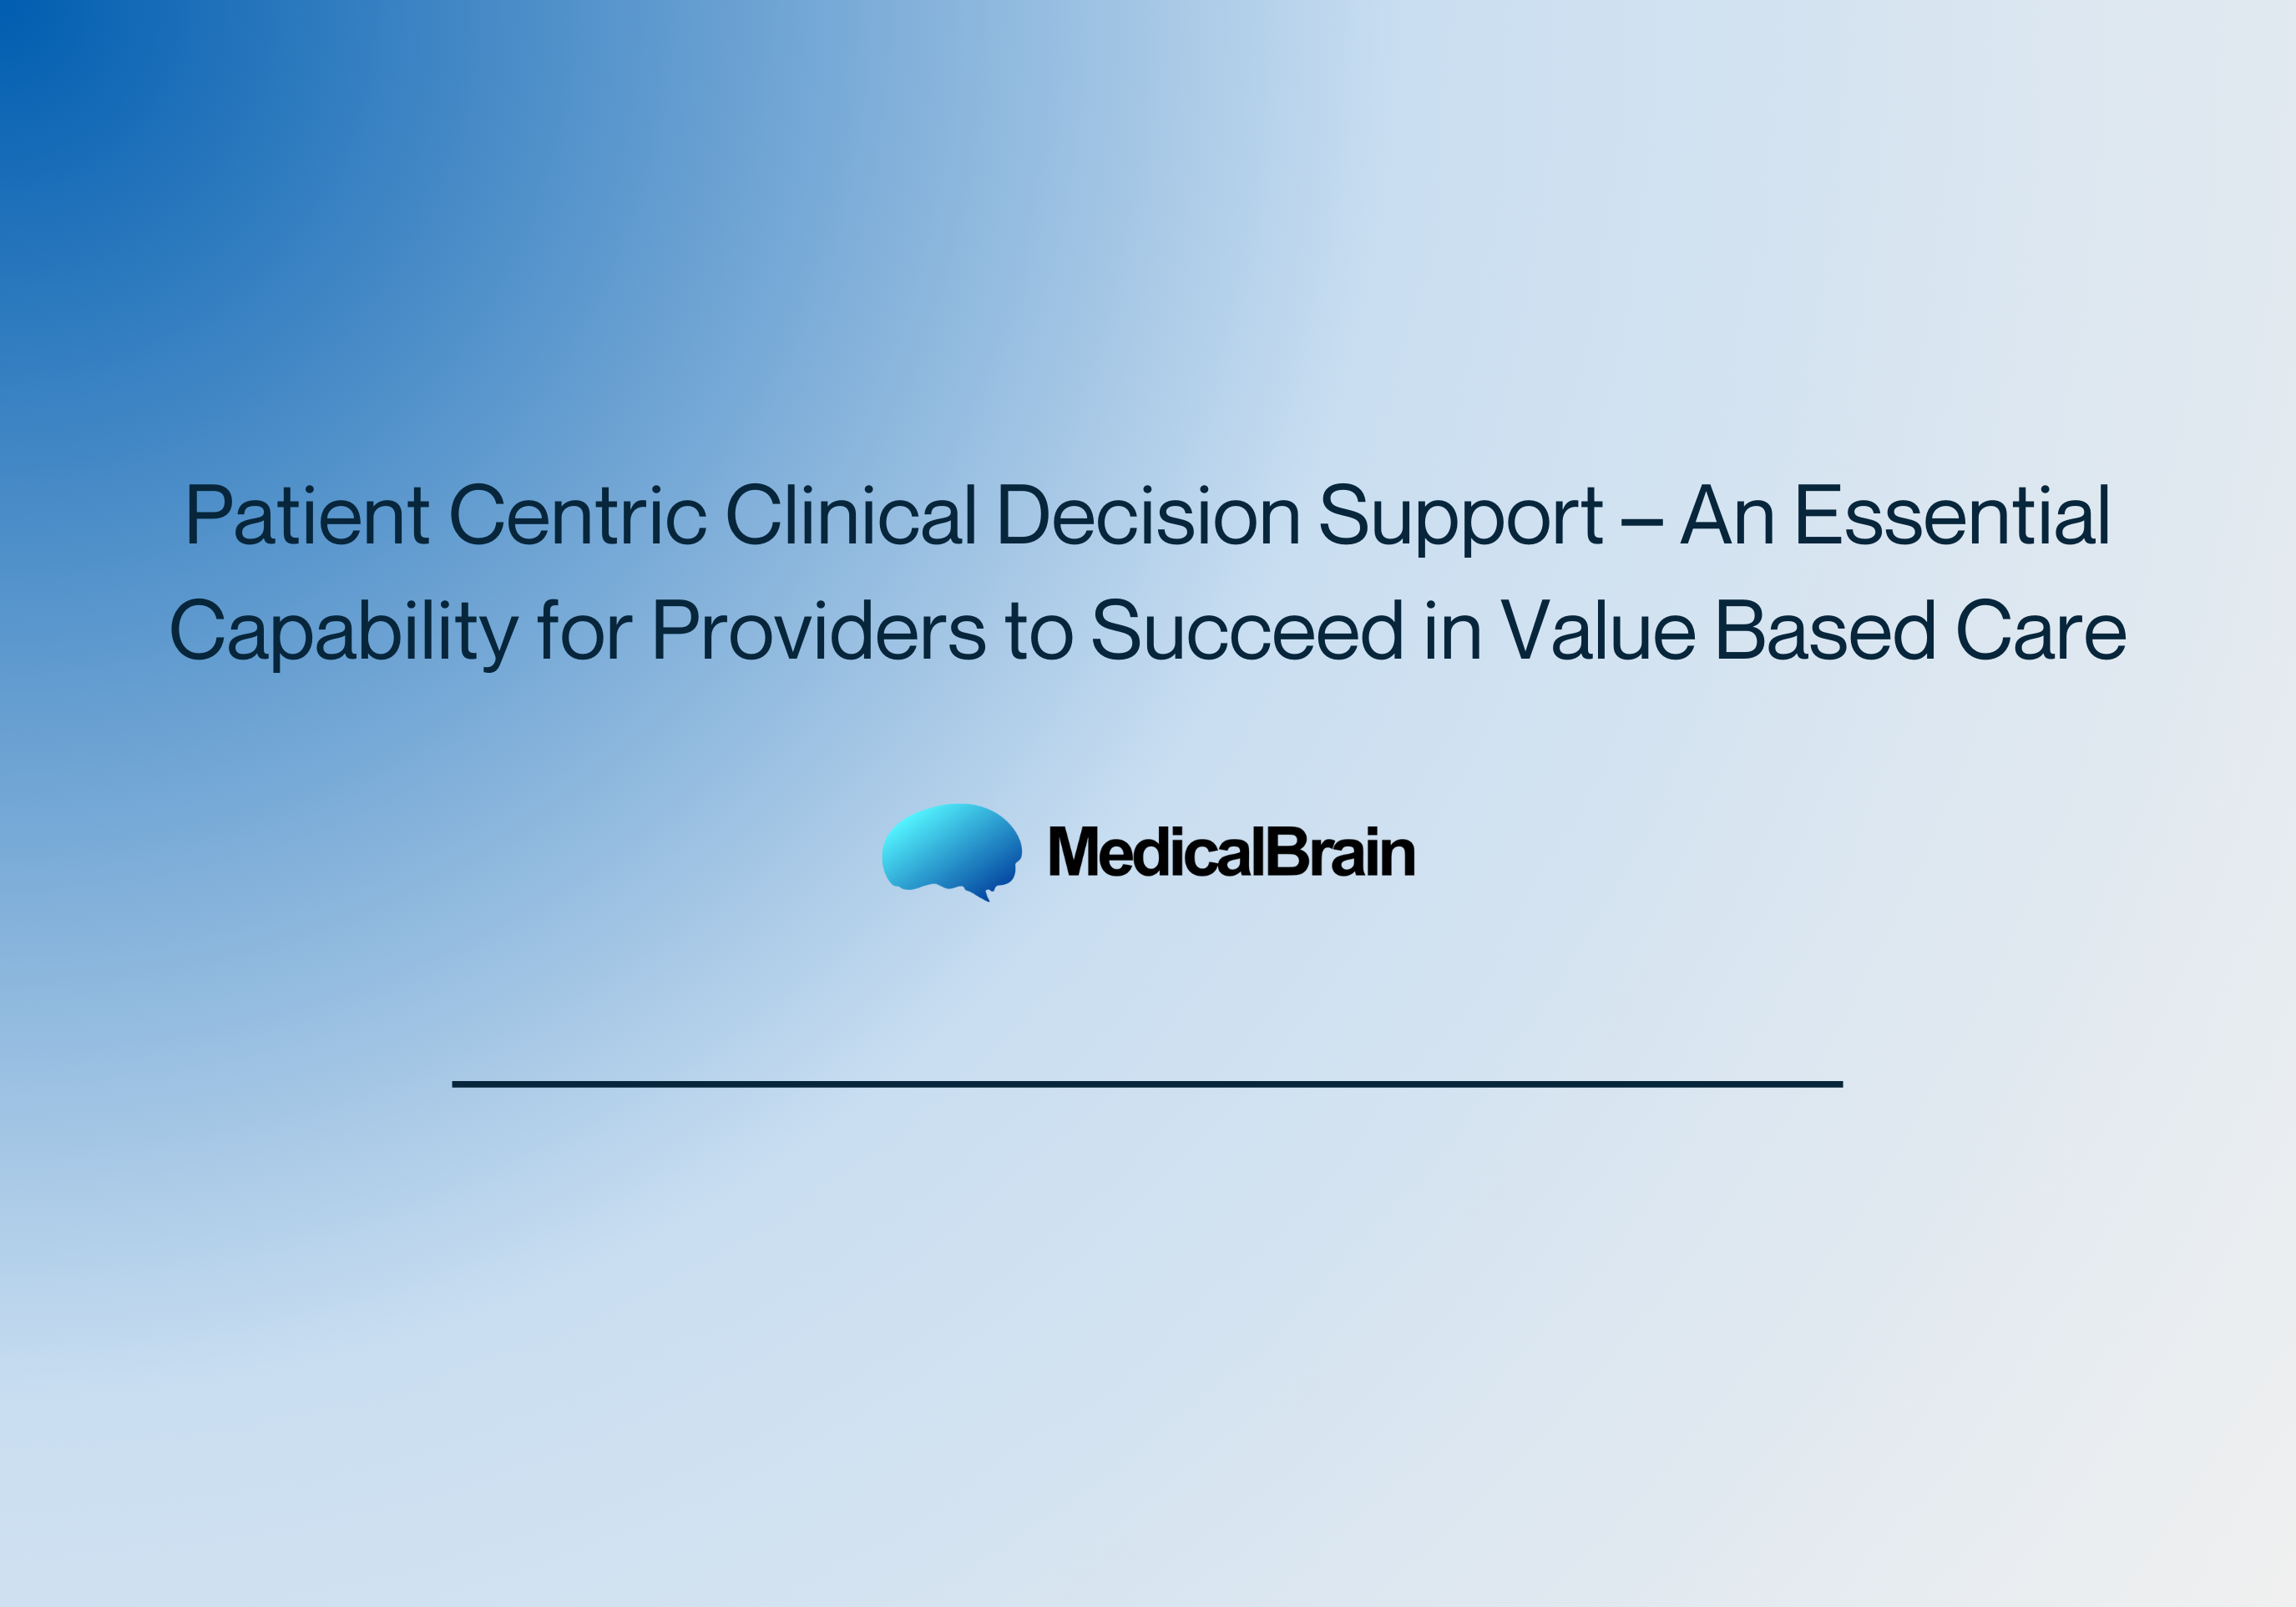 Patient Centric Clinical Decision Support – An Essential Capability for Providers to Succeed in Value Based Care